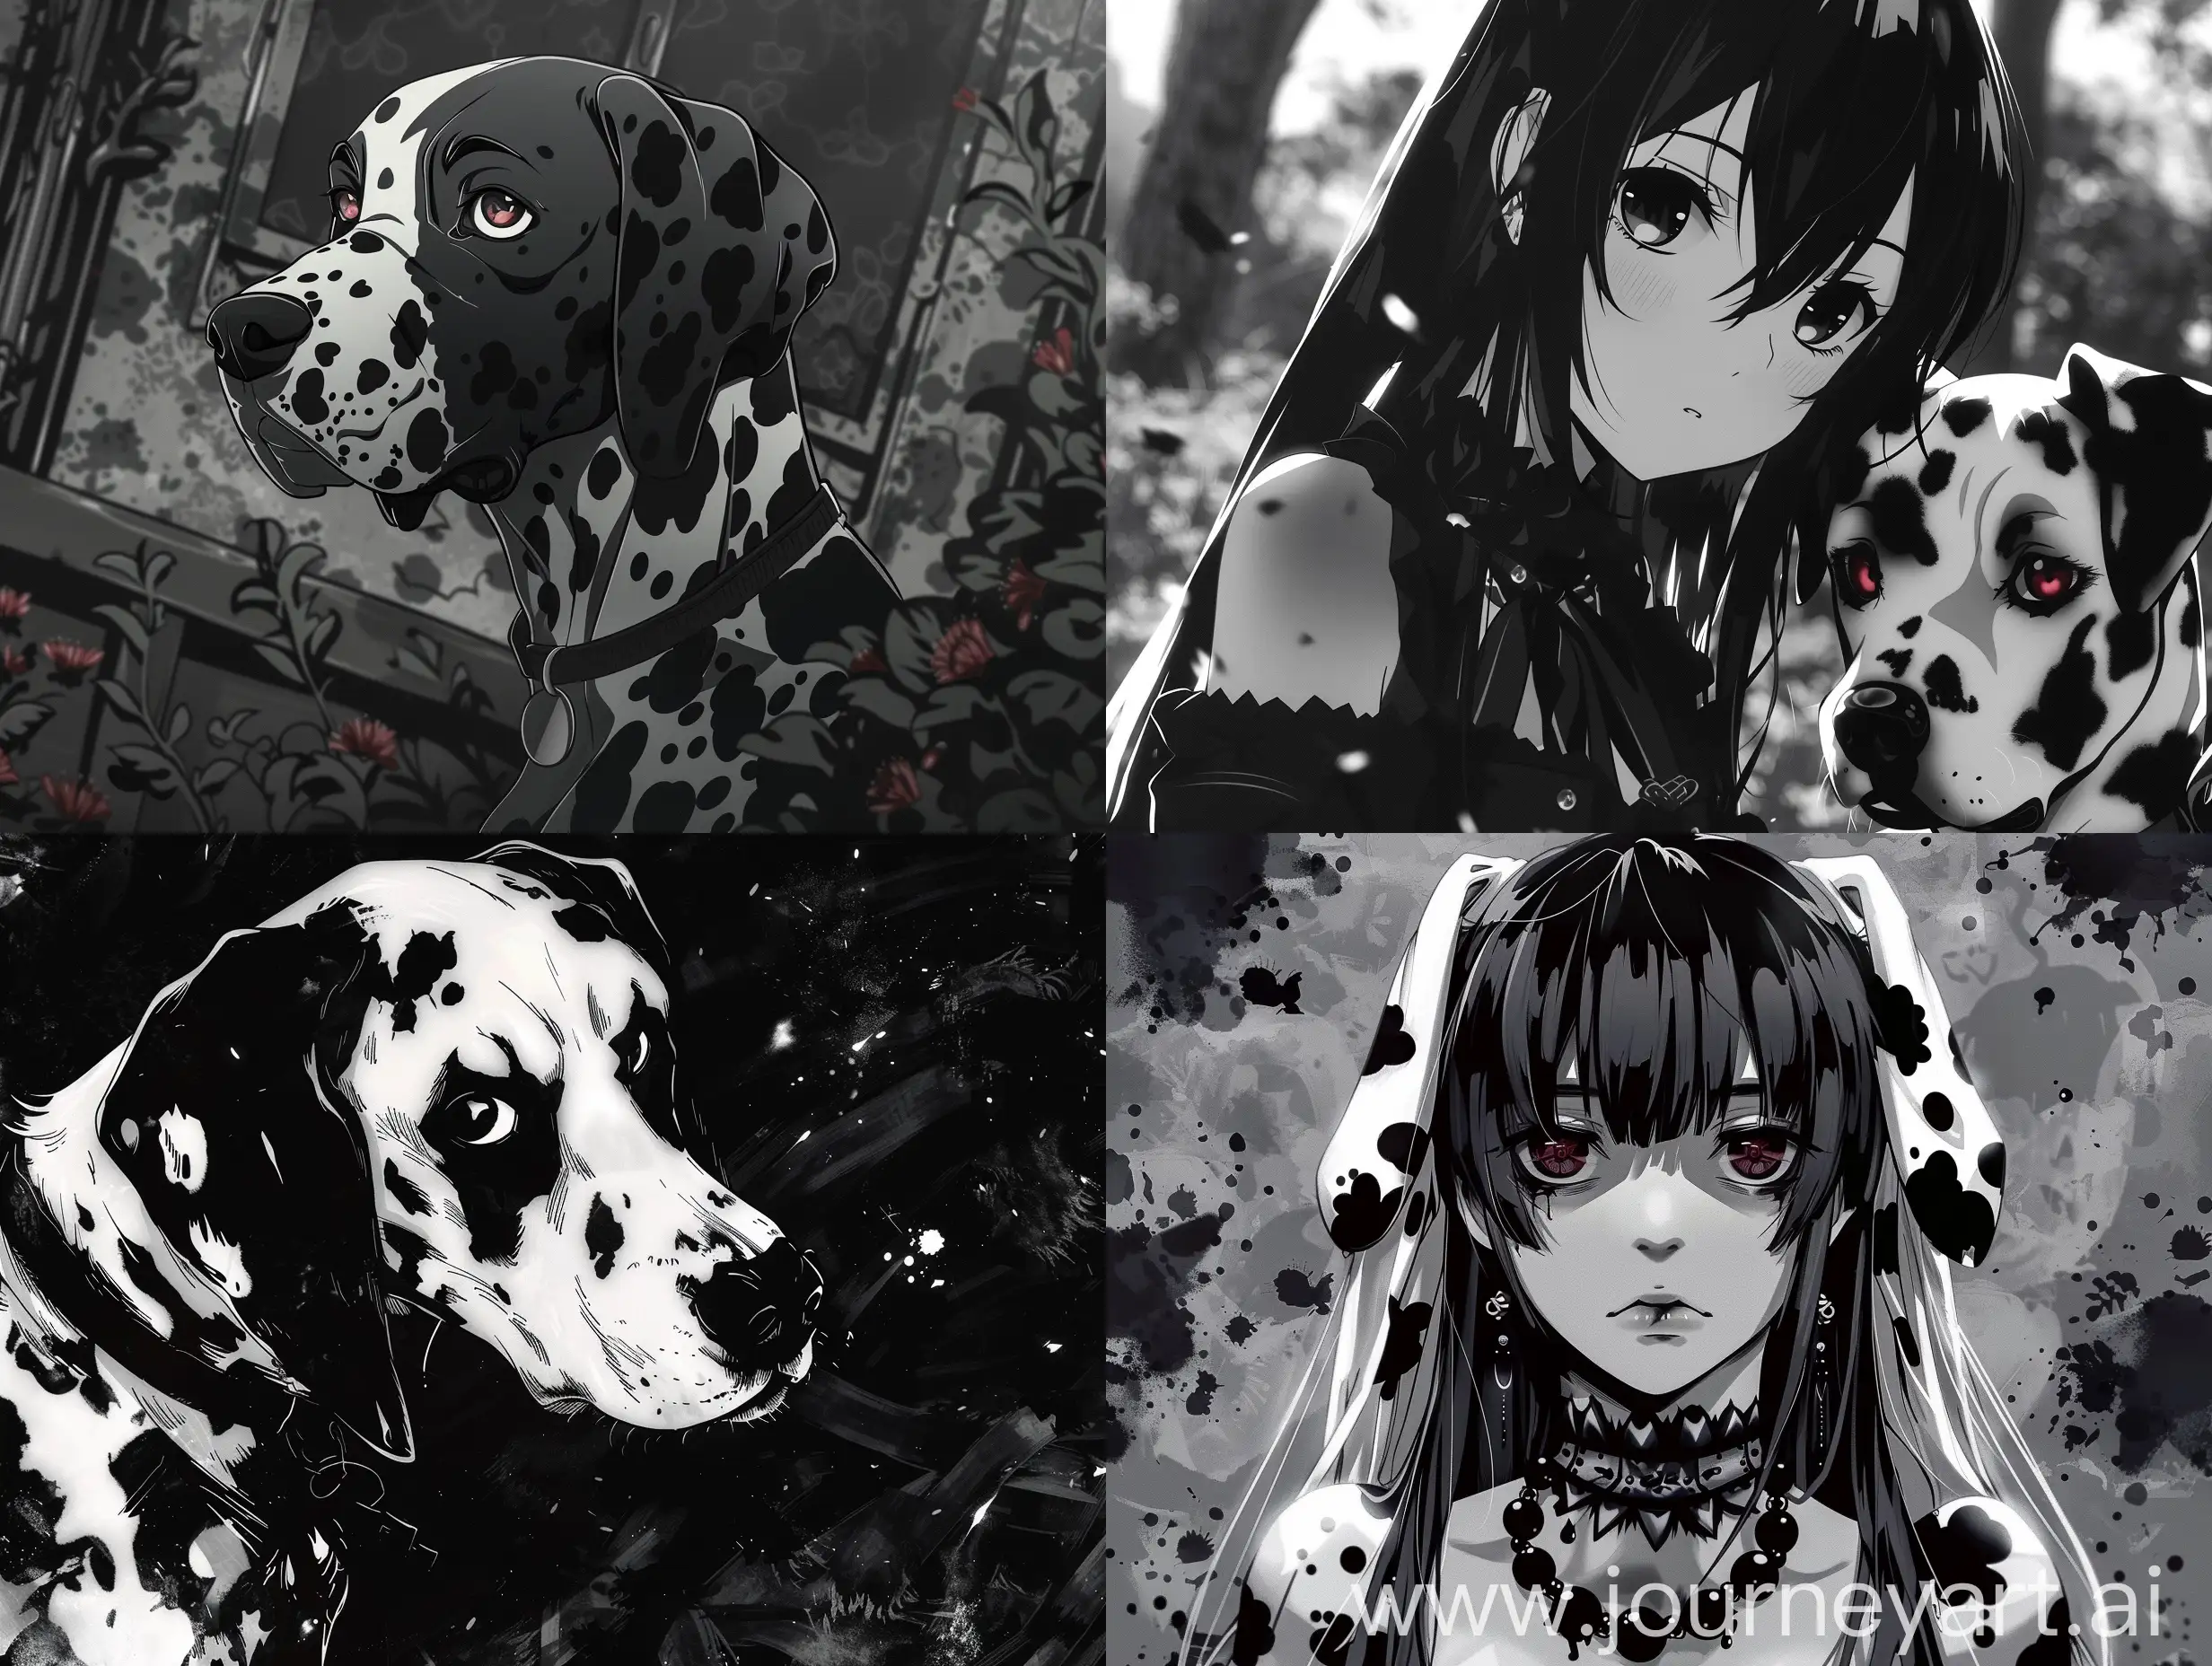 Anime-Style-Dalmatian-in-High-Quality-Gothic-Setting